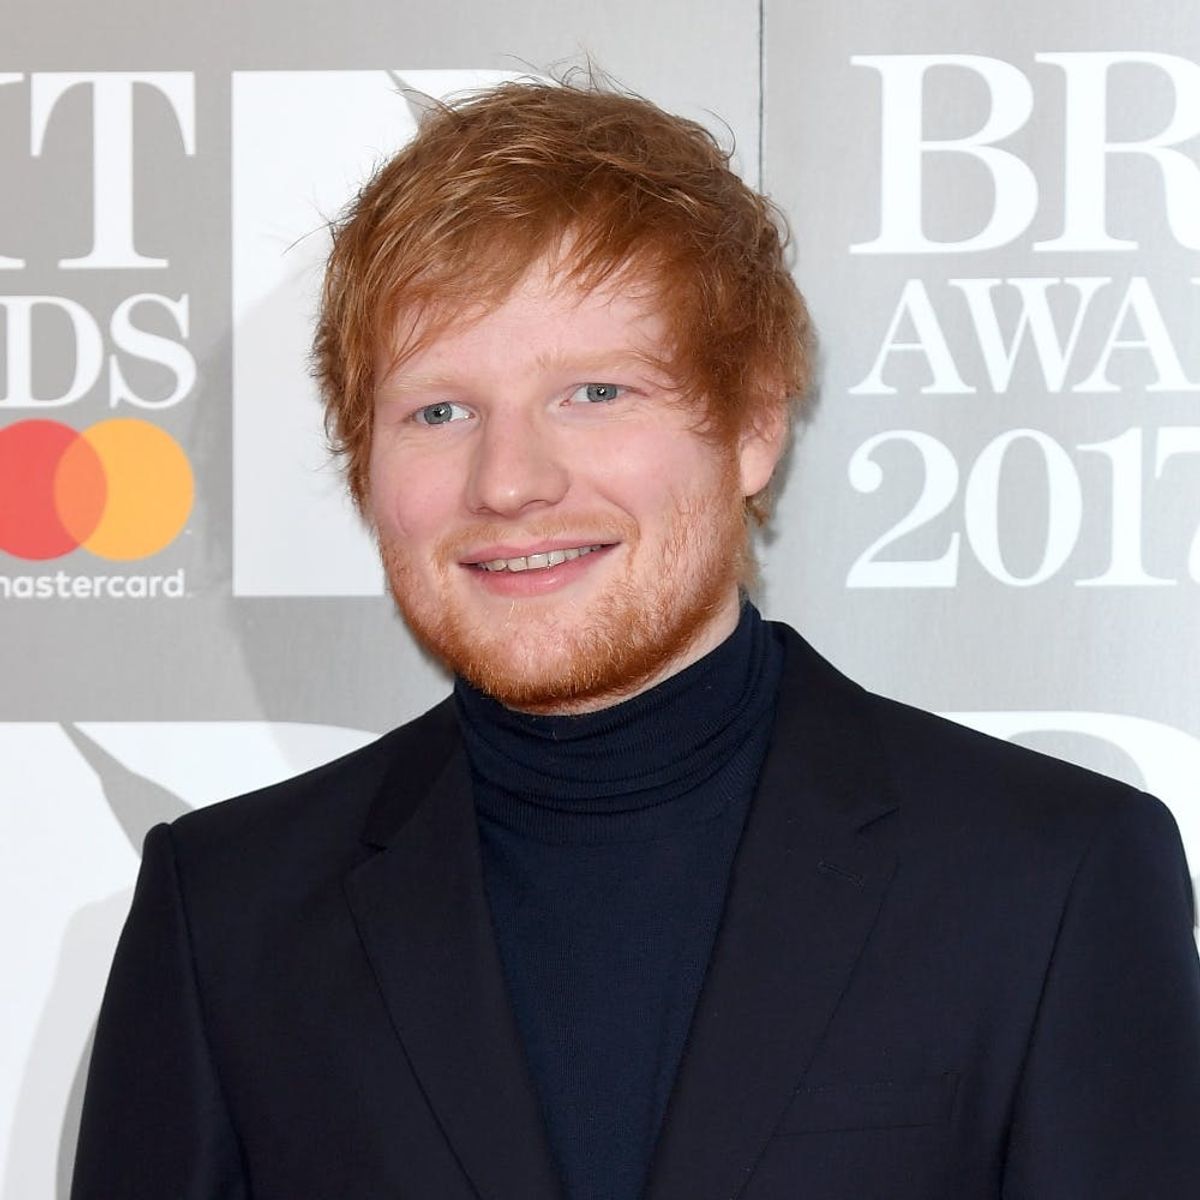 Taylor Swift’s Squad Loses Another Member As Ed Sheeran Bonds With Katy Perry